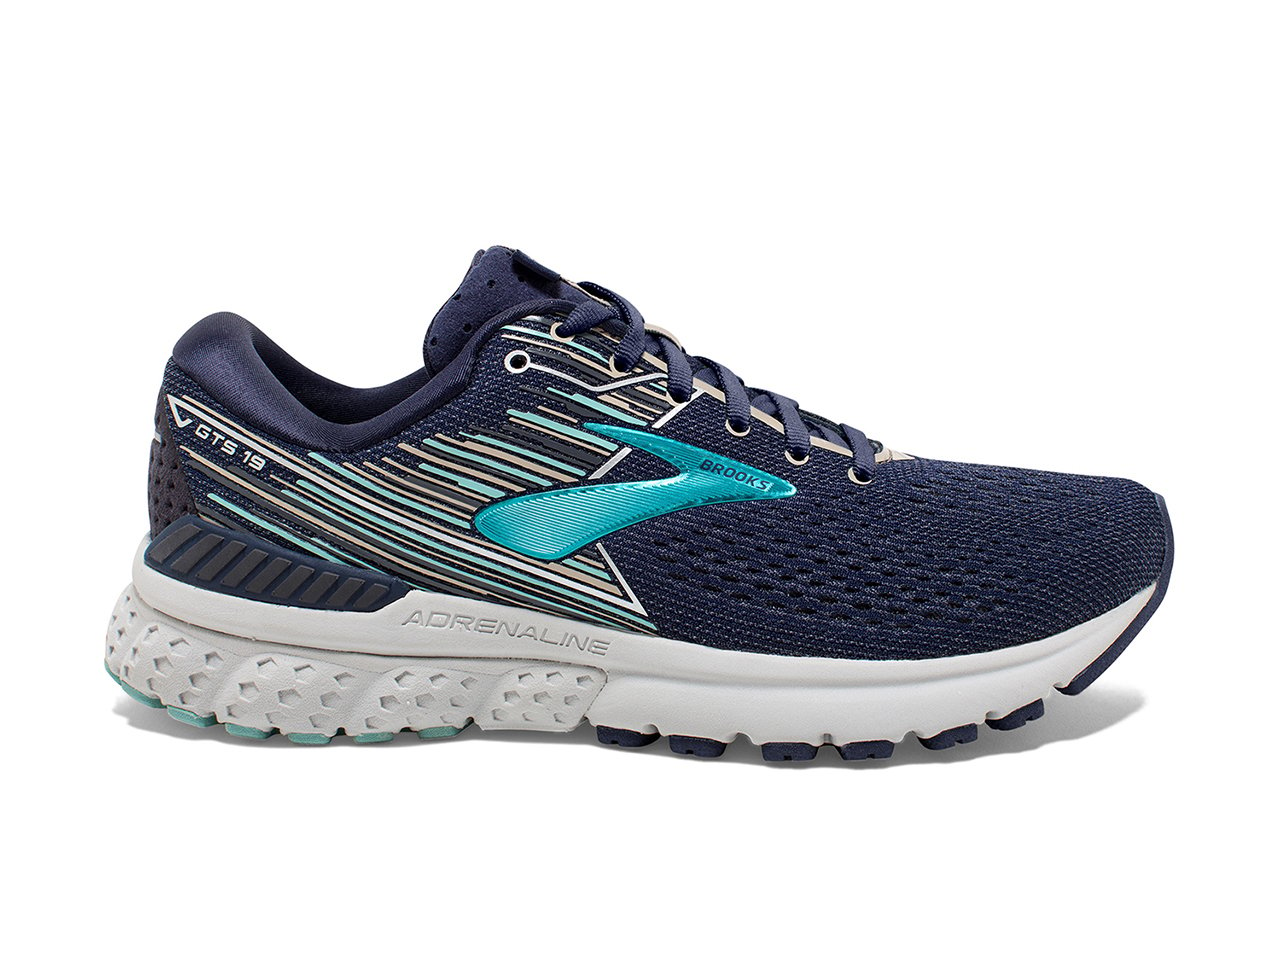 Great running shoes: BROOKS WOMEN'S ADRENALINE GTS 19 right shoe in blue